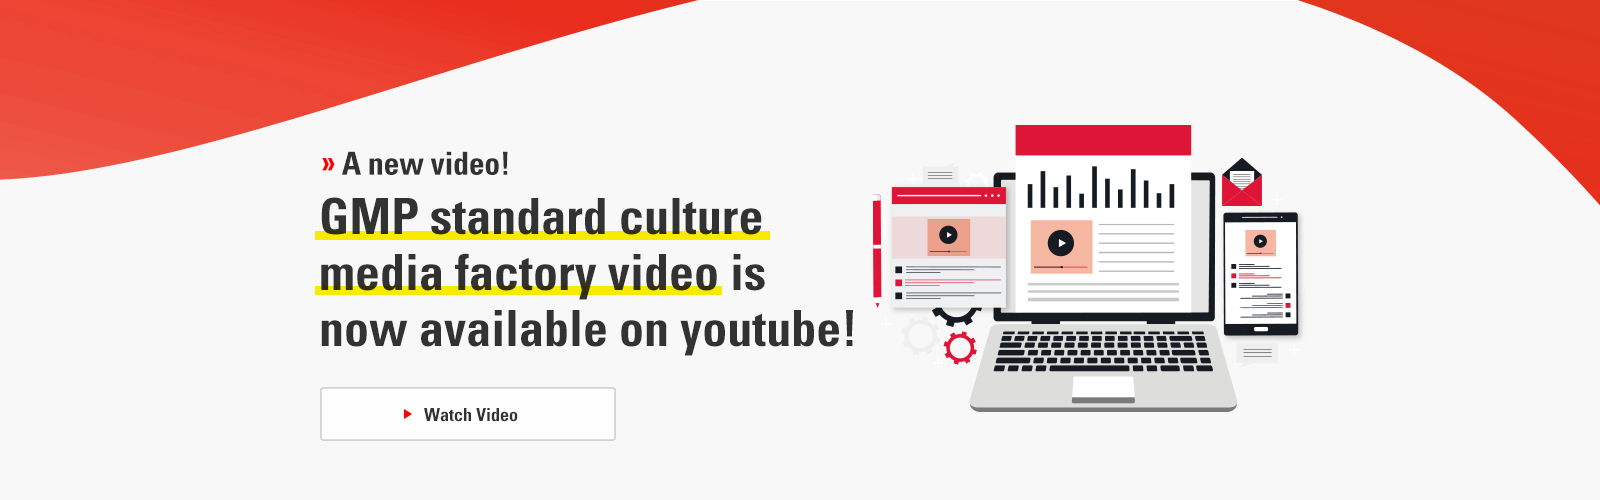 GMP standard culture media factory video is now available on youtube!